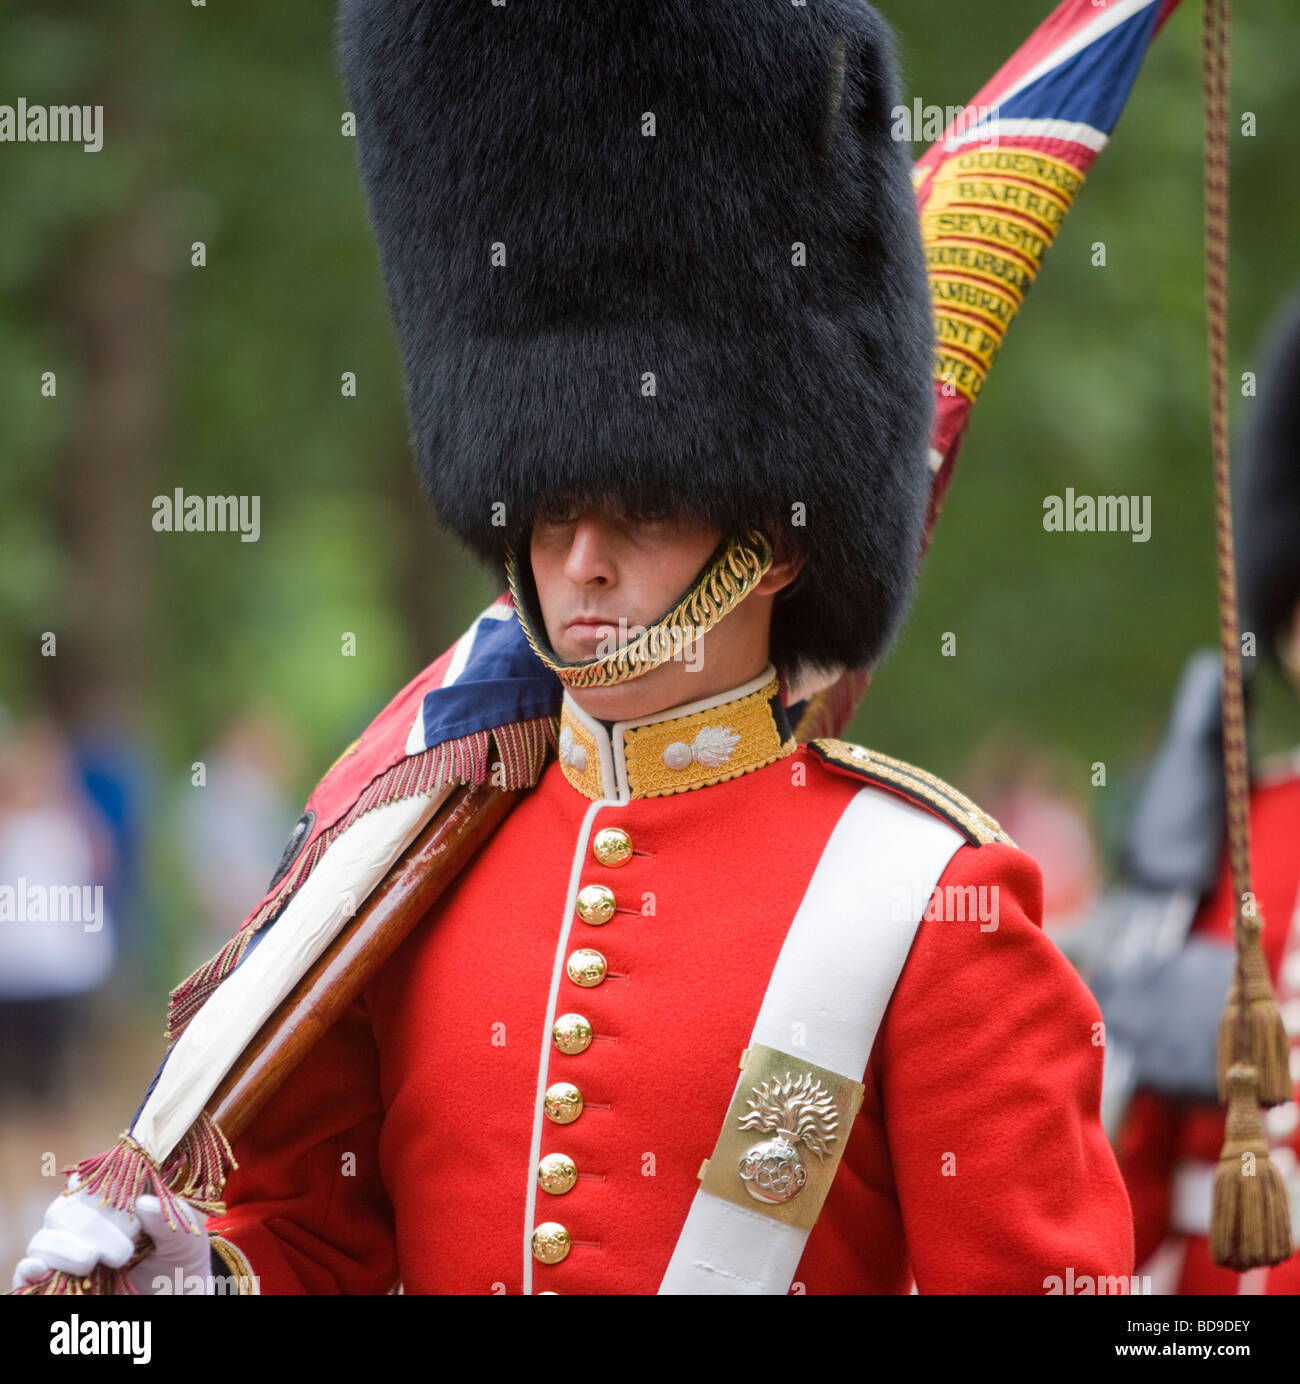 A Ensign from the Grenadier Guards leaves after Changing the Guard, Buckingham Palace, London, Great Britain Stock Photo